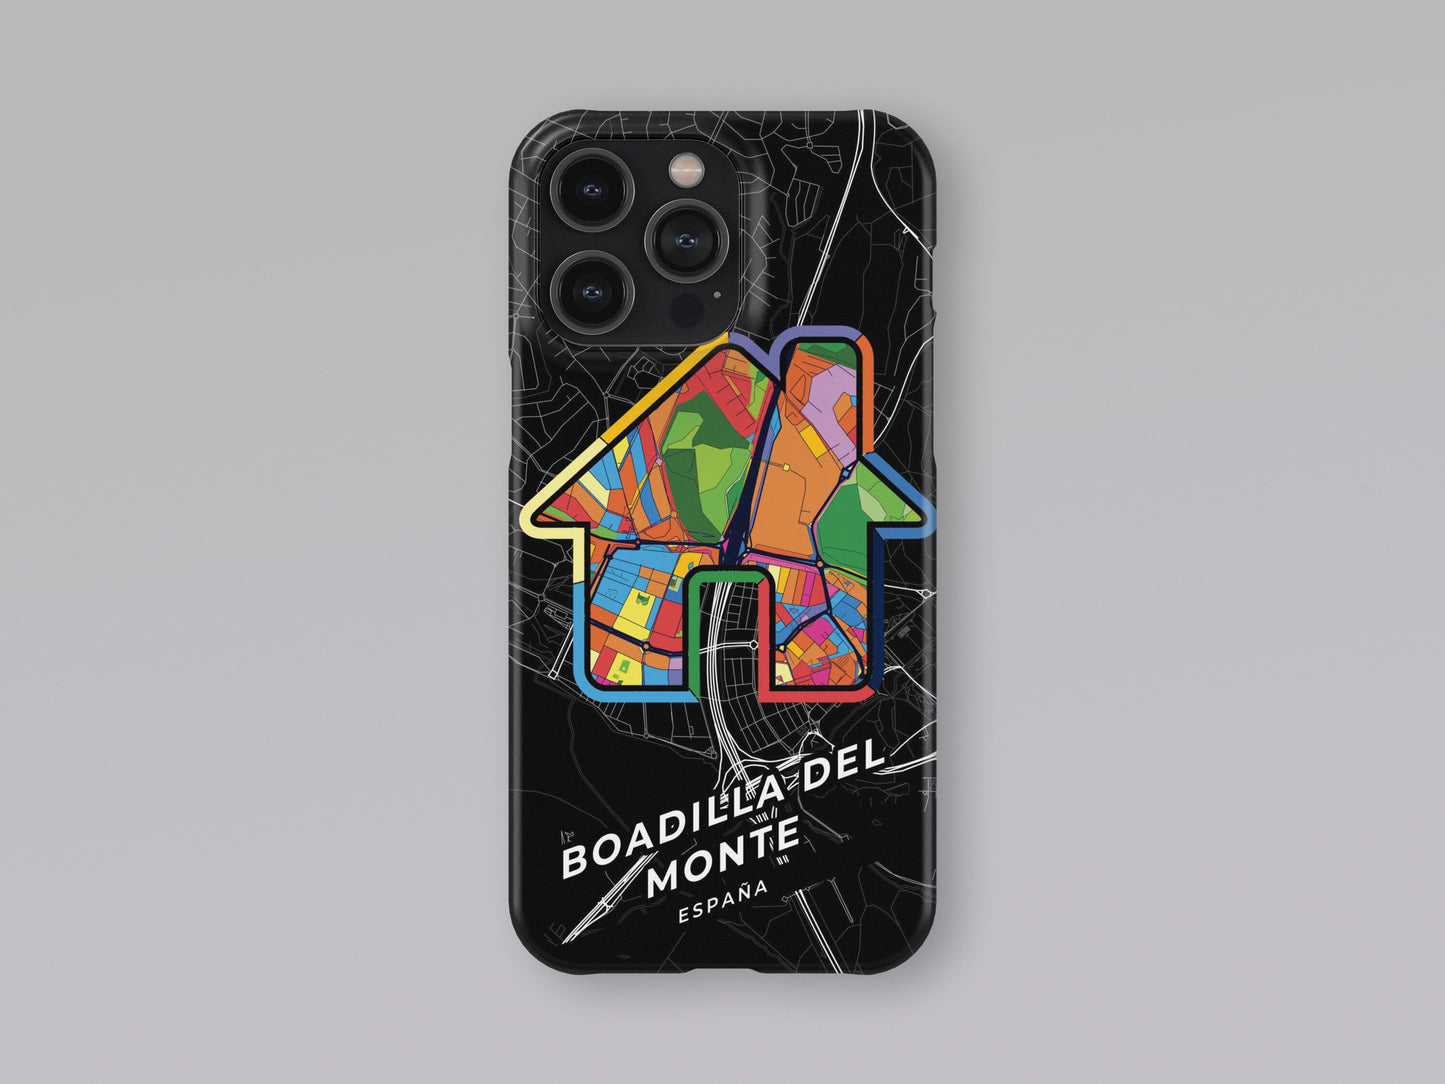 Boadilla Del Monte Spain slim phone case with colorful icon. Birthday, wedding or housewarming gift. Couple match cases. 3